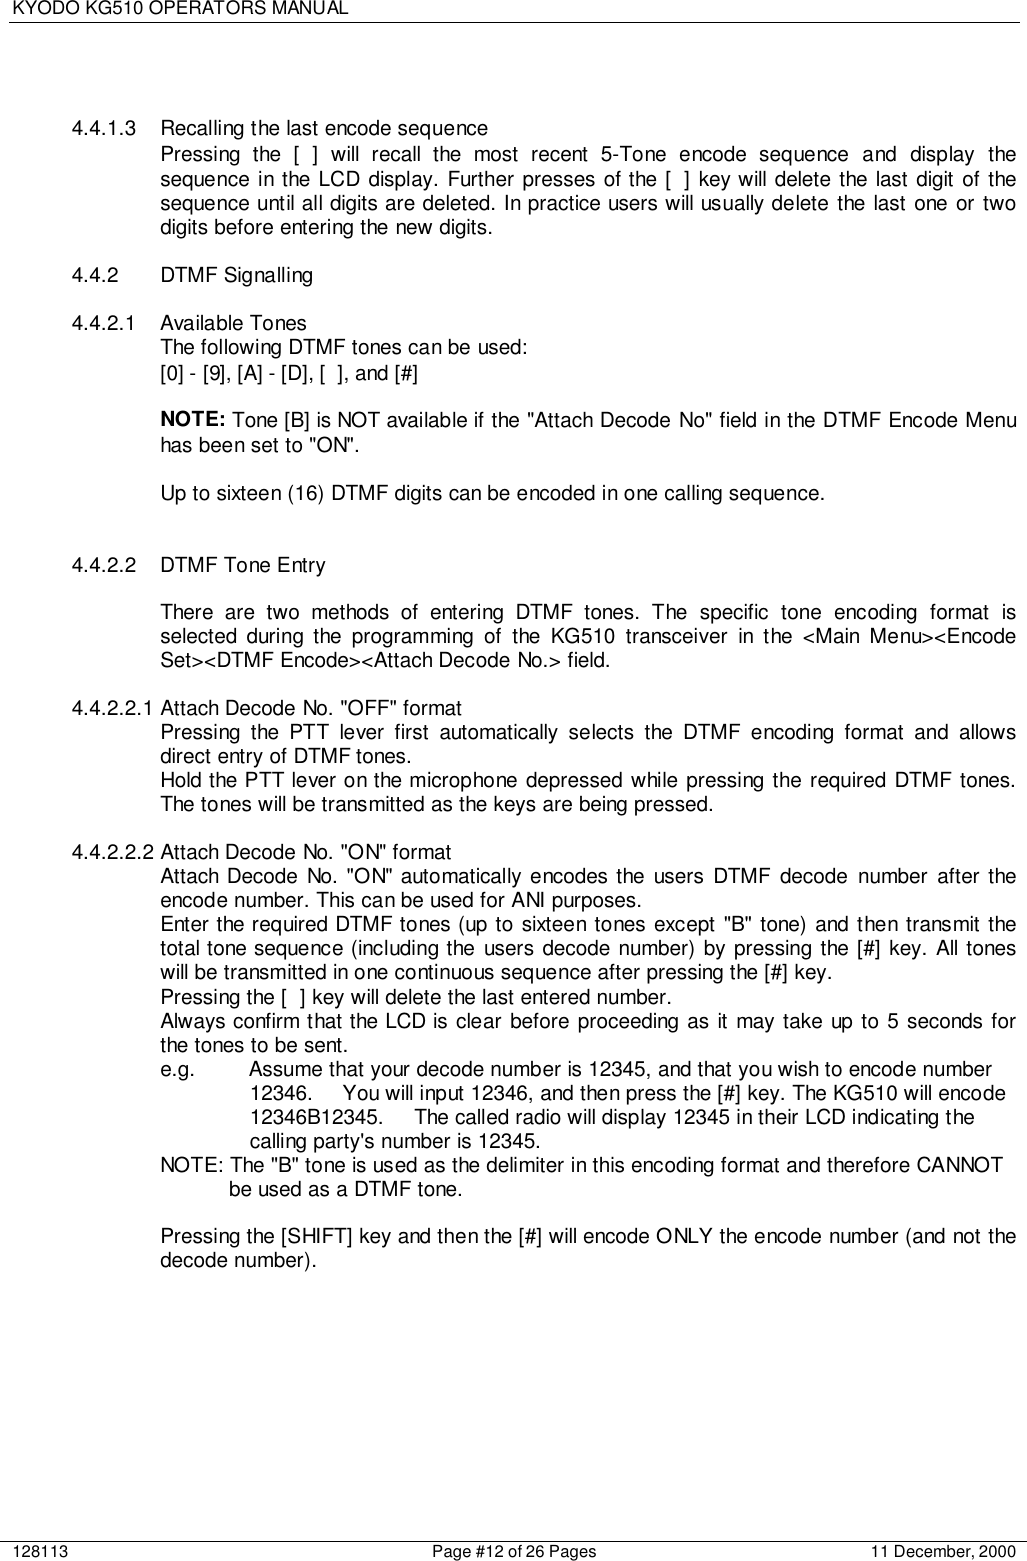 KYODO KG510 OPERATORS MANUAL128113 Page #12 of 26 Pages 11 December, 20004.4.1.3 Recalling the last encode sequencePressing the [ ] will recall the most recent 5-Tone encode sequence and display thesequence in the LCD display. Further presses of the [ ] key will delete the last digit of thesequence until all digits are deleted. In practice users will usually delete the last one or twodigits before entering the new digits.4.4.2 DTMF Signalling4.4.2.1 Available TonesThe following DTMF tones can be used:[0] - [9], [A] - [D], [ ], and [#]NOTE: Tone [B] is NOT available if the &quot;Attach Decode No&quot; field in the DTMF Encode Menuhas been set to &quot;ON&quot;.Up to sixteen (16) DTMF digits can be encoded in one calling sequence.4.4.2.2  DTMF Tone EntryThere are two methods of entering DTMF tones. The specific tone encoding format isselected during the programming of the KG510 transceiver in the &lt;Main Menu&gt;&lt;EncodeSet&gt;&lt;DTMF Encode&gt;&lt;Attach Decode No.&gt; field.4.4.2.2.1 Attach Decode No. &quot;OFF&quot; formatPressing the PTT lever first automatically selects the DTMF encoding format and allowsdirect entry of DTMF tones.Hold the PTT lever on the microphone depressed while pressing the required DTMF tones.The tones will be transmitted as the keys are being pressed.4.4.2.2.2 Attach Decode No. &quot;ON&quot; formatAttach Decode No. &quot;ON&quot; automatically encodes the users DTMF decode number after theencode number. This can be used for ANI purposes.Enter the required DTMF tones (up to sixteen tones except &quot;B&quot; tone) and then transmit thetotal tone sequence (including the users decode number) by pressing the [#] key. All toneswill be transmitted in one continuous sequence after pressing the [#] key.Pressing the [ ] key will delete the last entered number.Always confirm that the LCD is clear before proceeding as it may take up to 5 seconds forthe tones to be sent.e.g. Assume that your decode number is 12345, and that you wish to encode number 12346.     You will input 12346, and then press the [#] key. The KG510 will encode 12346B12345.     The called radio will display 12345 in their LCD indicating the calling party&apos;s number is 12345.NOTE: The &quot;B&quot; tone is used as the delimiter in this encoding format and therefore CANNOT be used as a DTMF tone.Pressing the [SHIFT] key and then the [#] will encode ONLY the encode number (and not thedecode number).